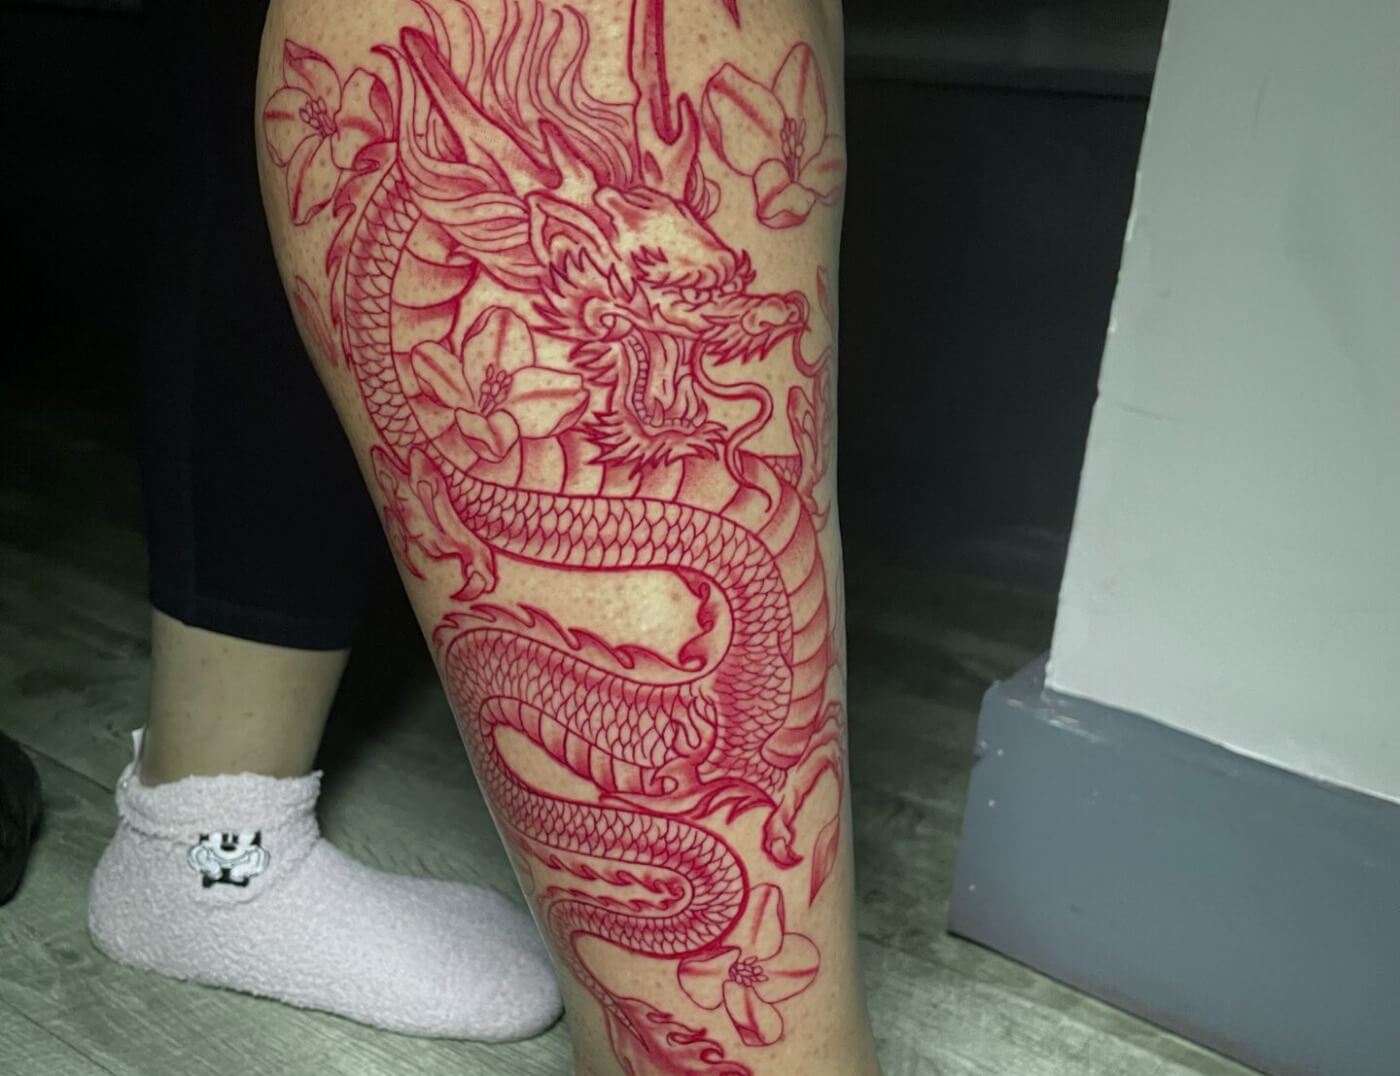 Red dragon animal tattoo inked by Lyric at Iron Palm Tattoos & body Piercing in downtown Atlanta's castleberry district. Call 404-973-7828. Walk-Ins welcome.